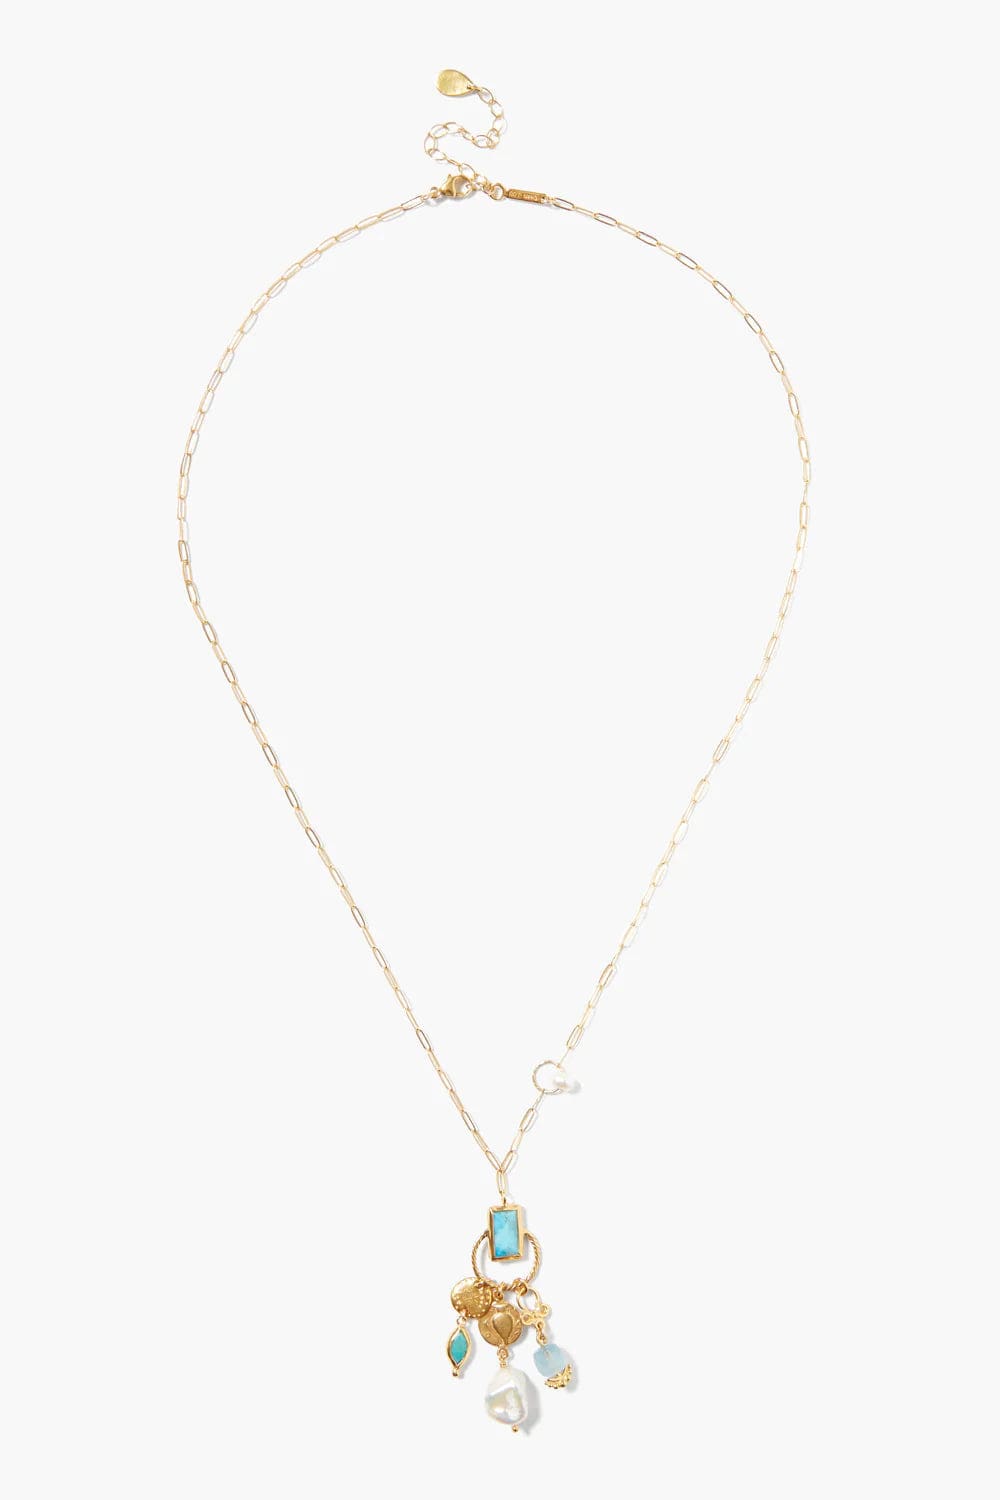 NKL-GPL Halo Charm Necklace Turquoise Mix